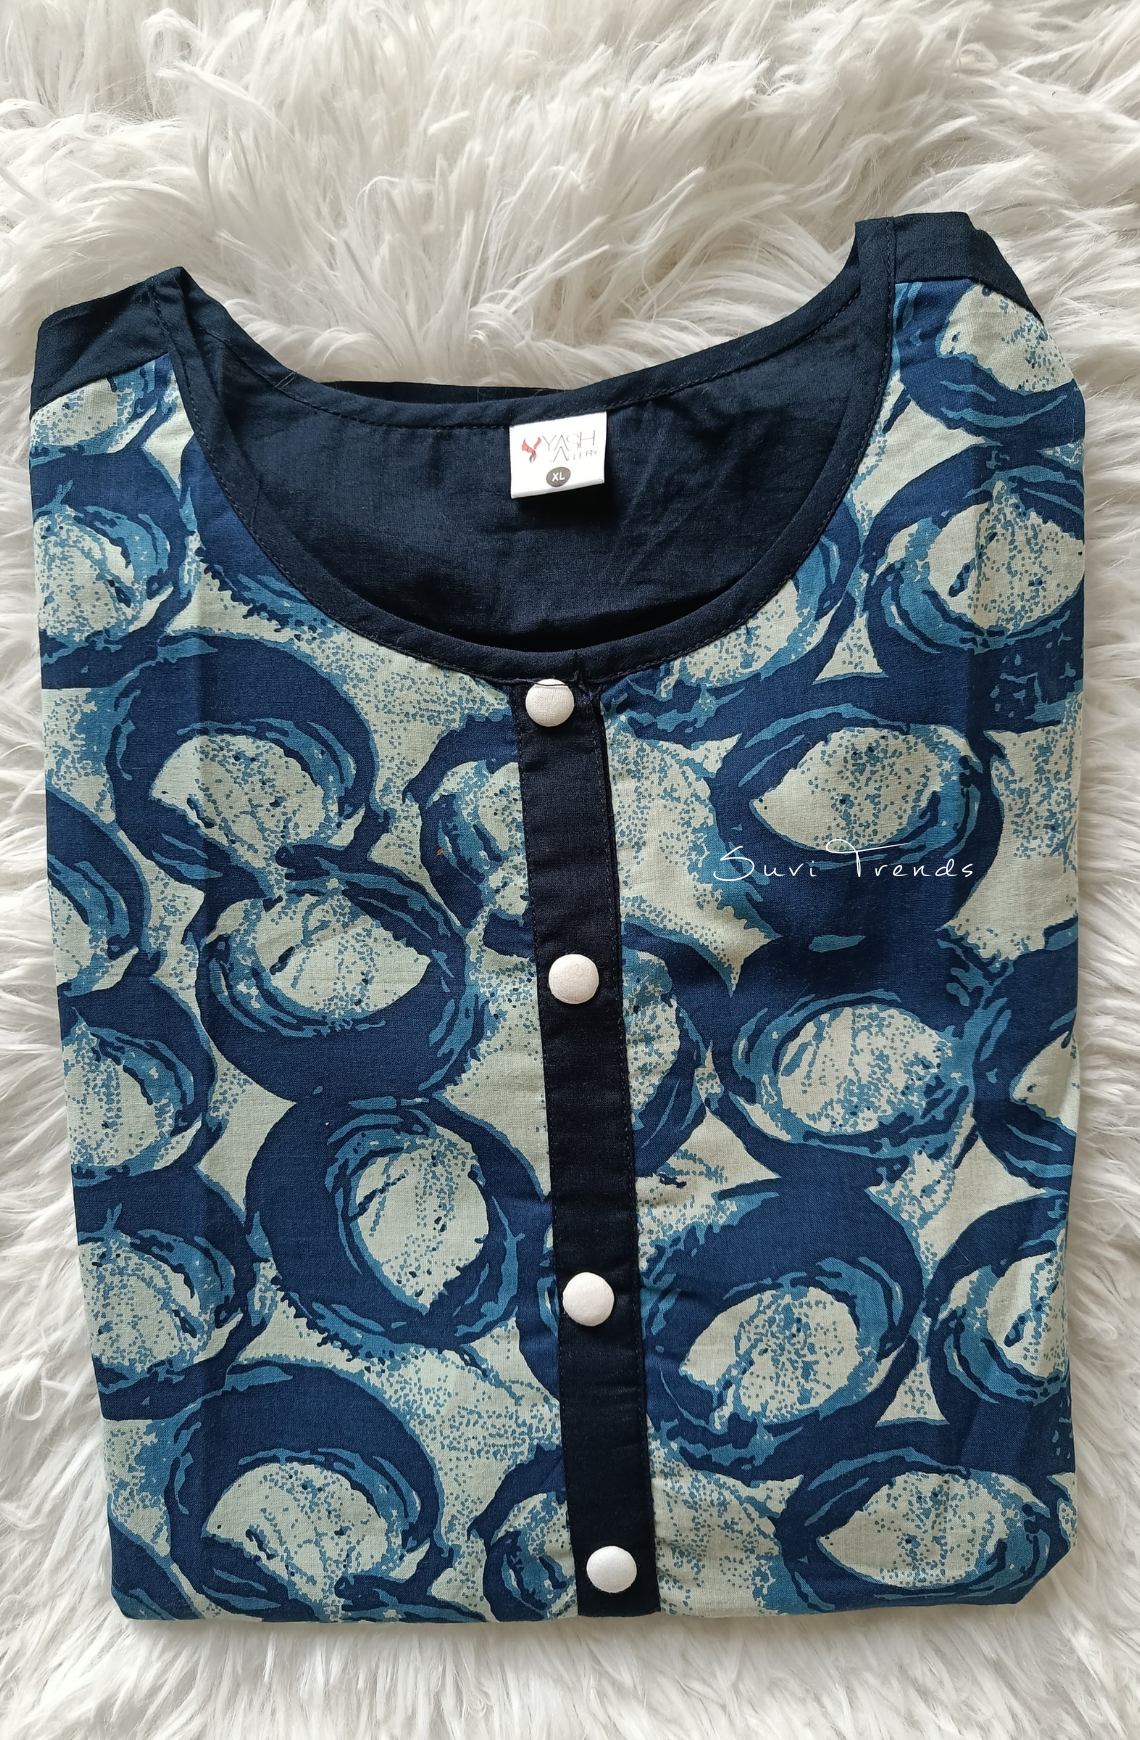 Abstract Printed Short Top - Blue